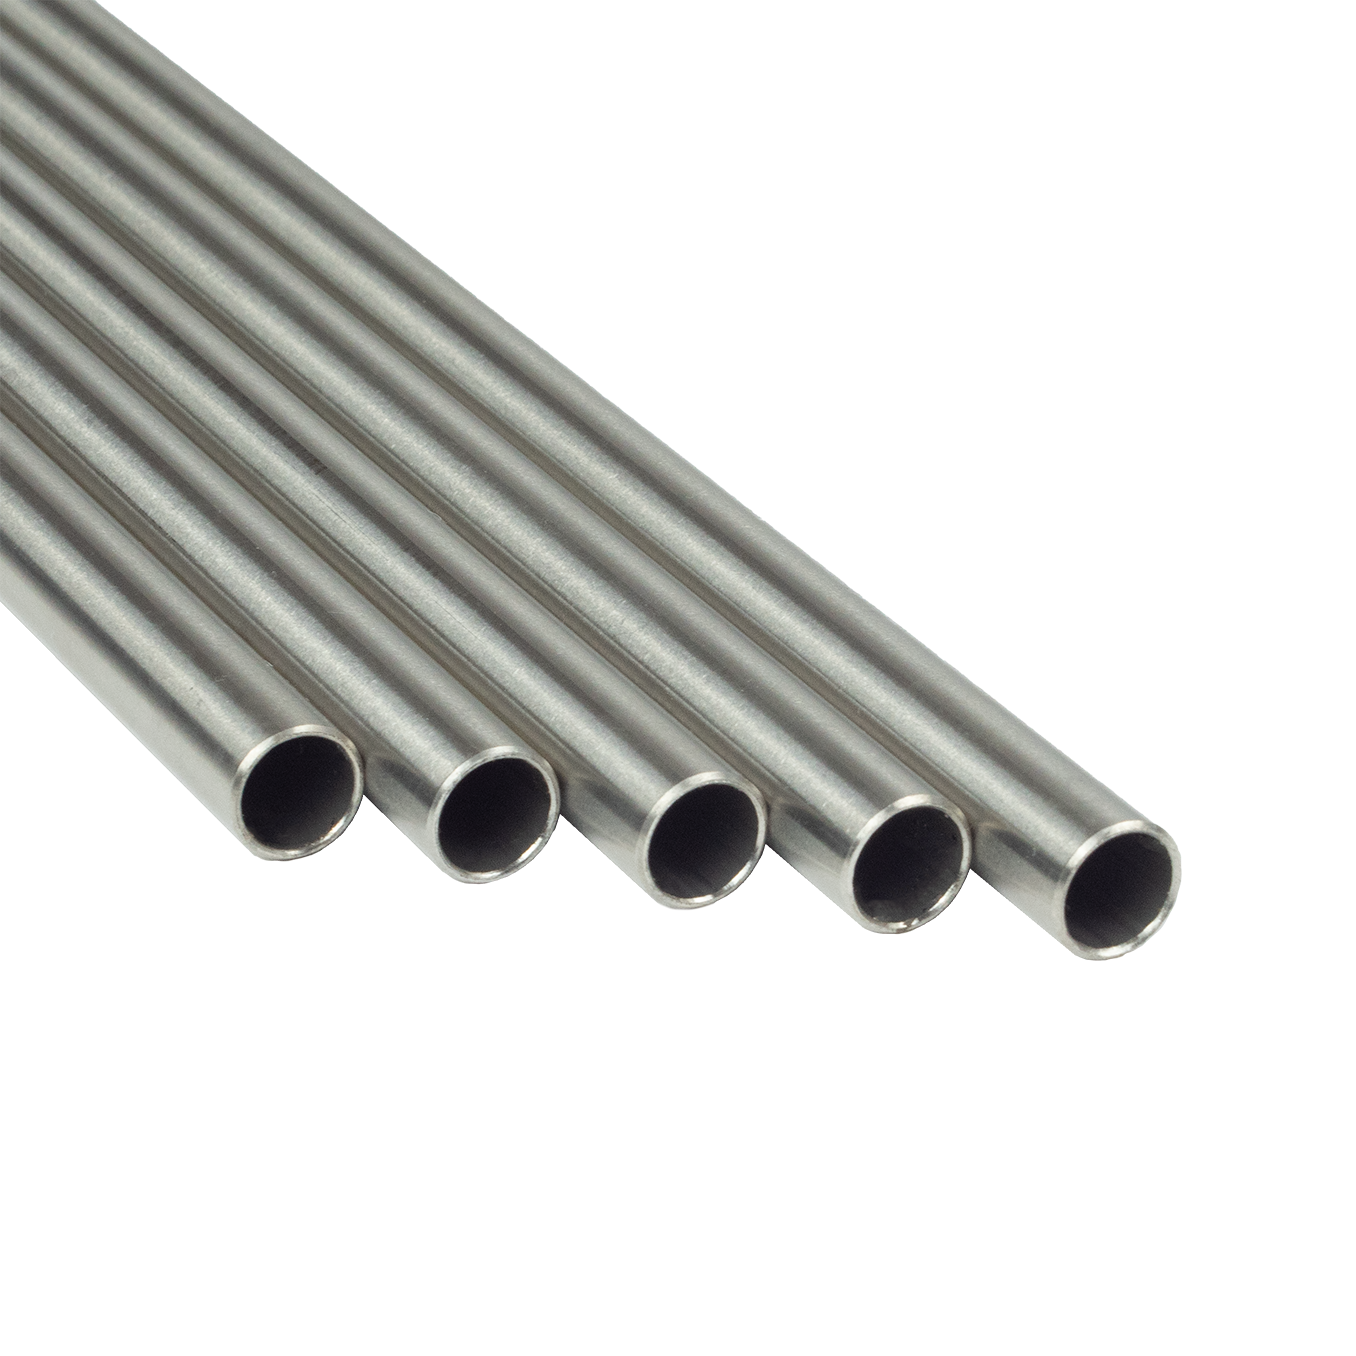 SFS Stand Tube - Ø 13 x 1 mm, length 1000 mm - stainless steel